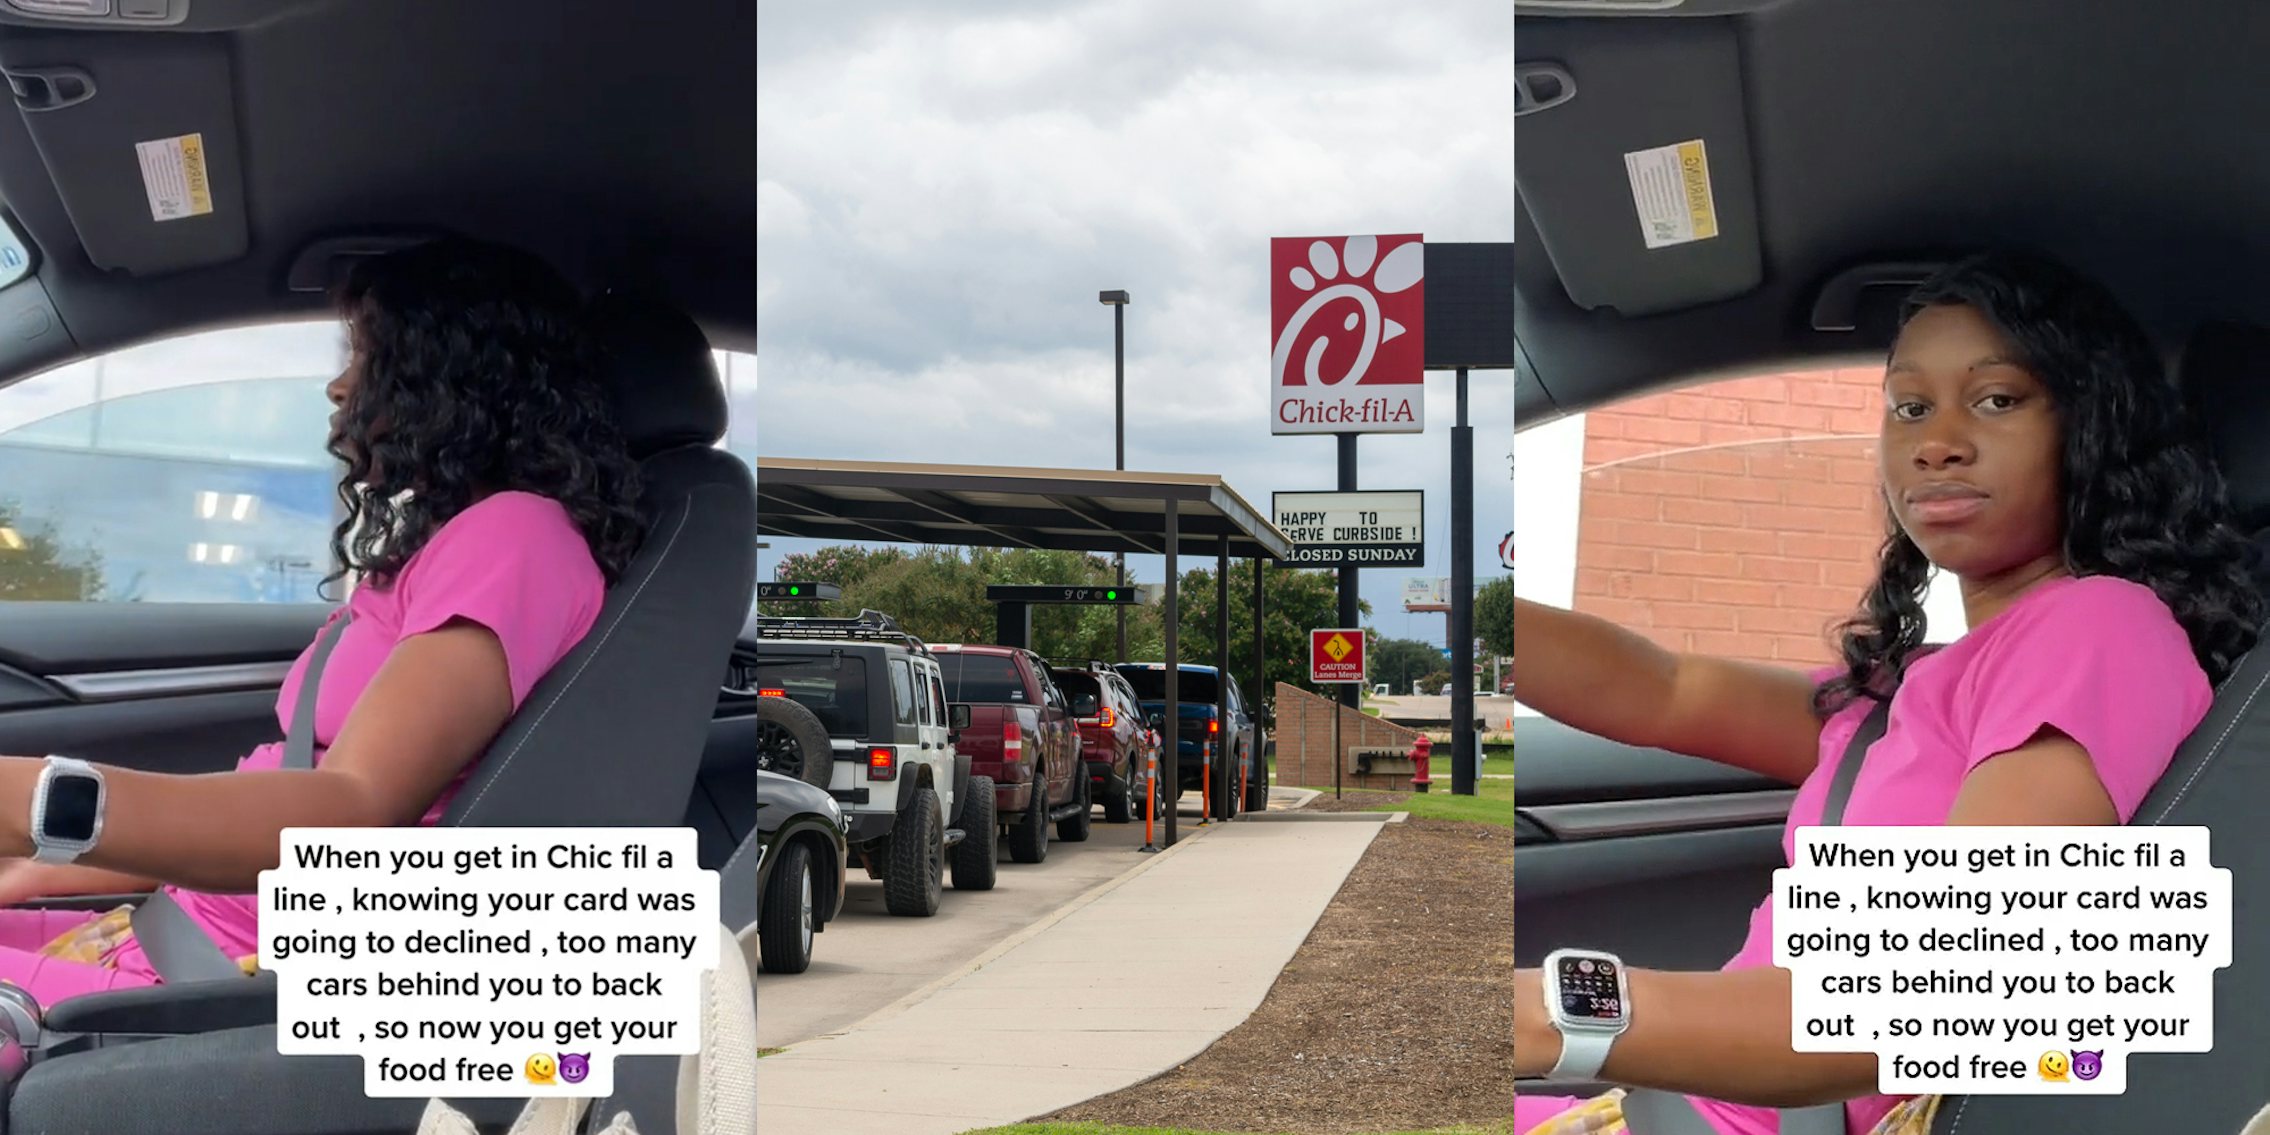 woman driving in car caption 'When you get in Chic fil a line, knowing your card was going to get declined, too many cars behind you to back out, so now you get your food free' (l) Chick-fil-A drive thru with sign (c) woman driving in car caption 'When you get in Chic fil a line, knowing your card was going to get declined, too many cars behind you to back out, so now you get your food free' (r)